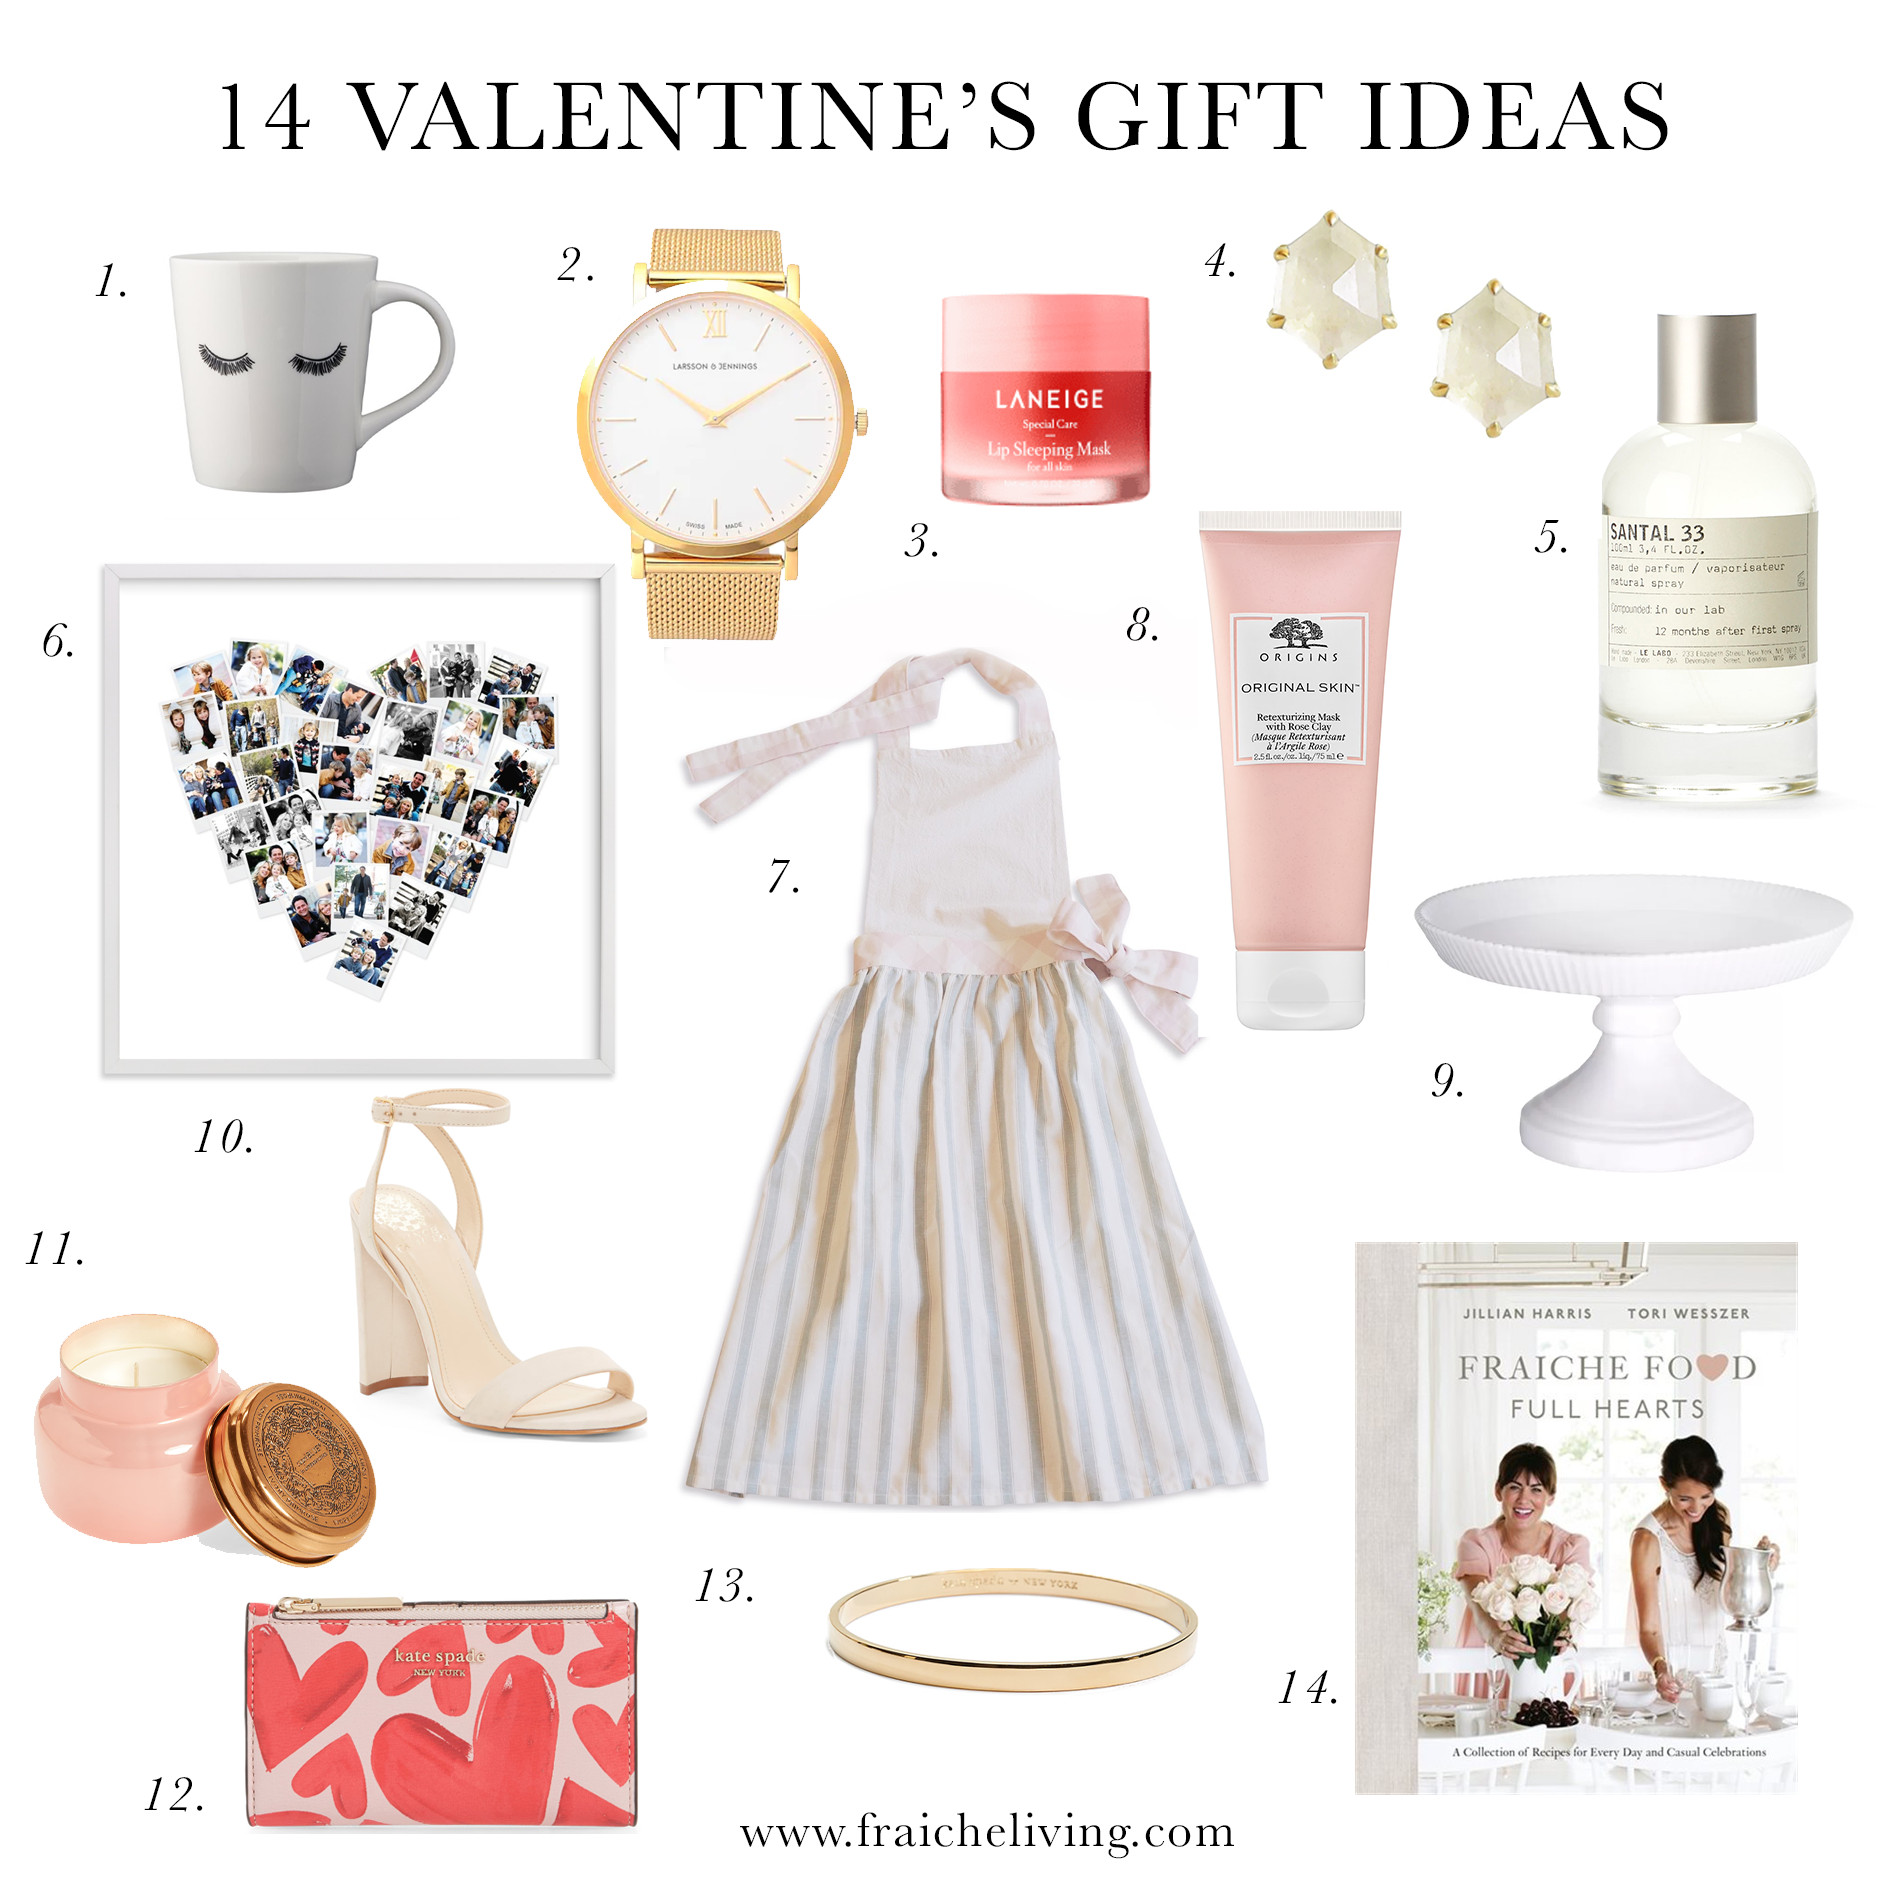 Valentine Gift Ideas 2020
 14 Valentine s Day Gift Ideas in 2020 With images